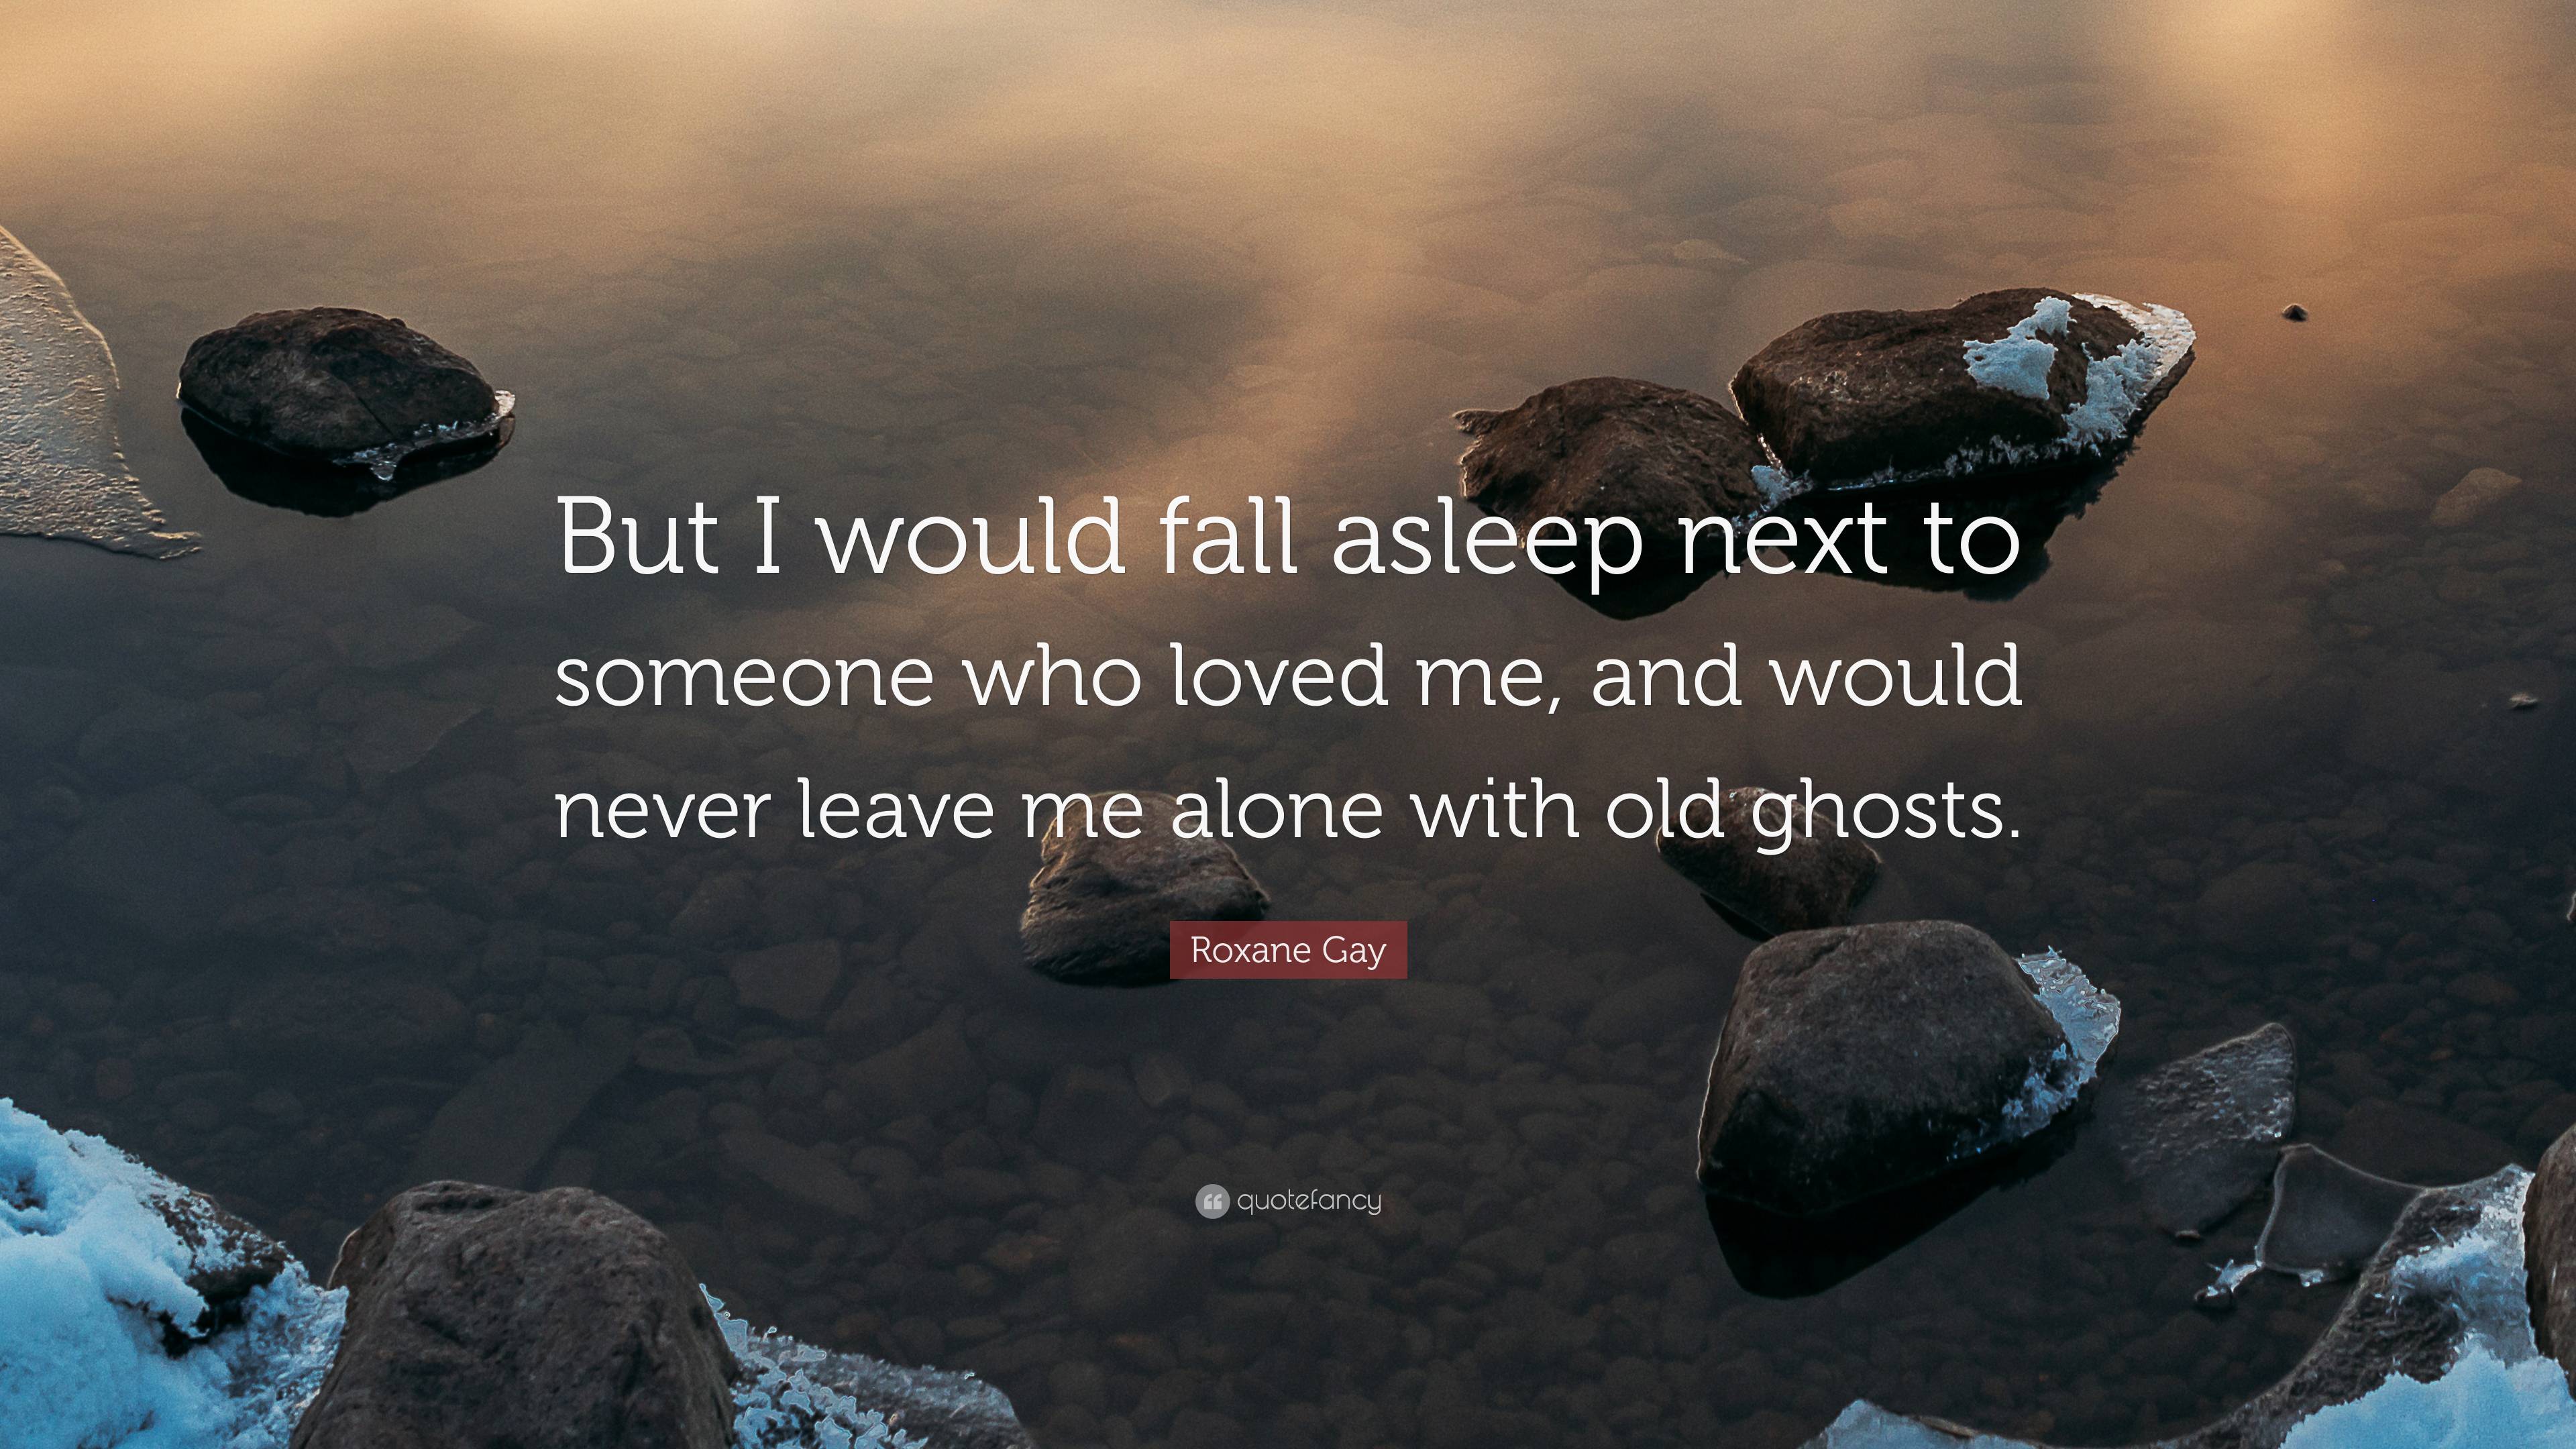 Roxane Gay Quote: “But I would fall asleep next to someone who loved me,  and would